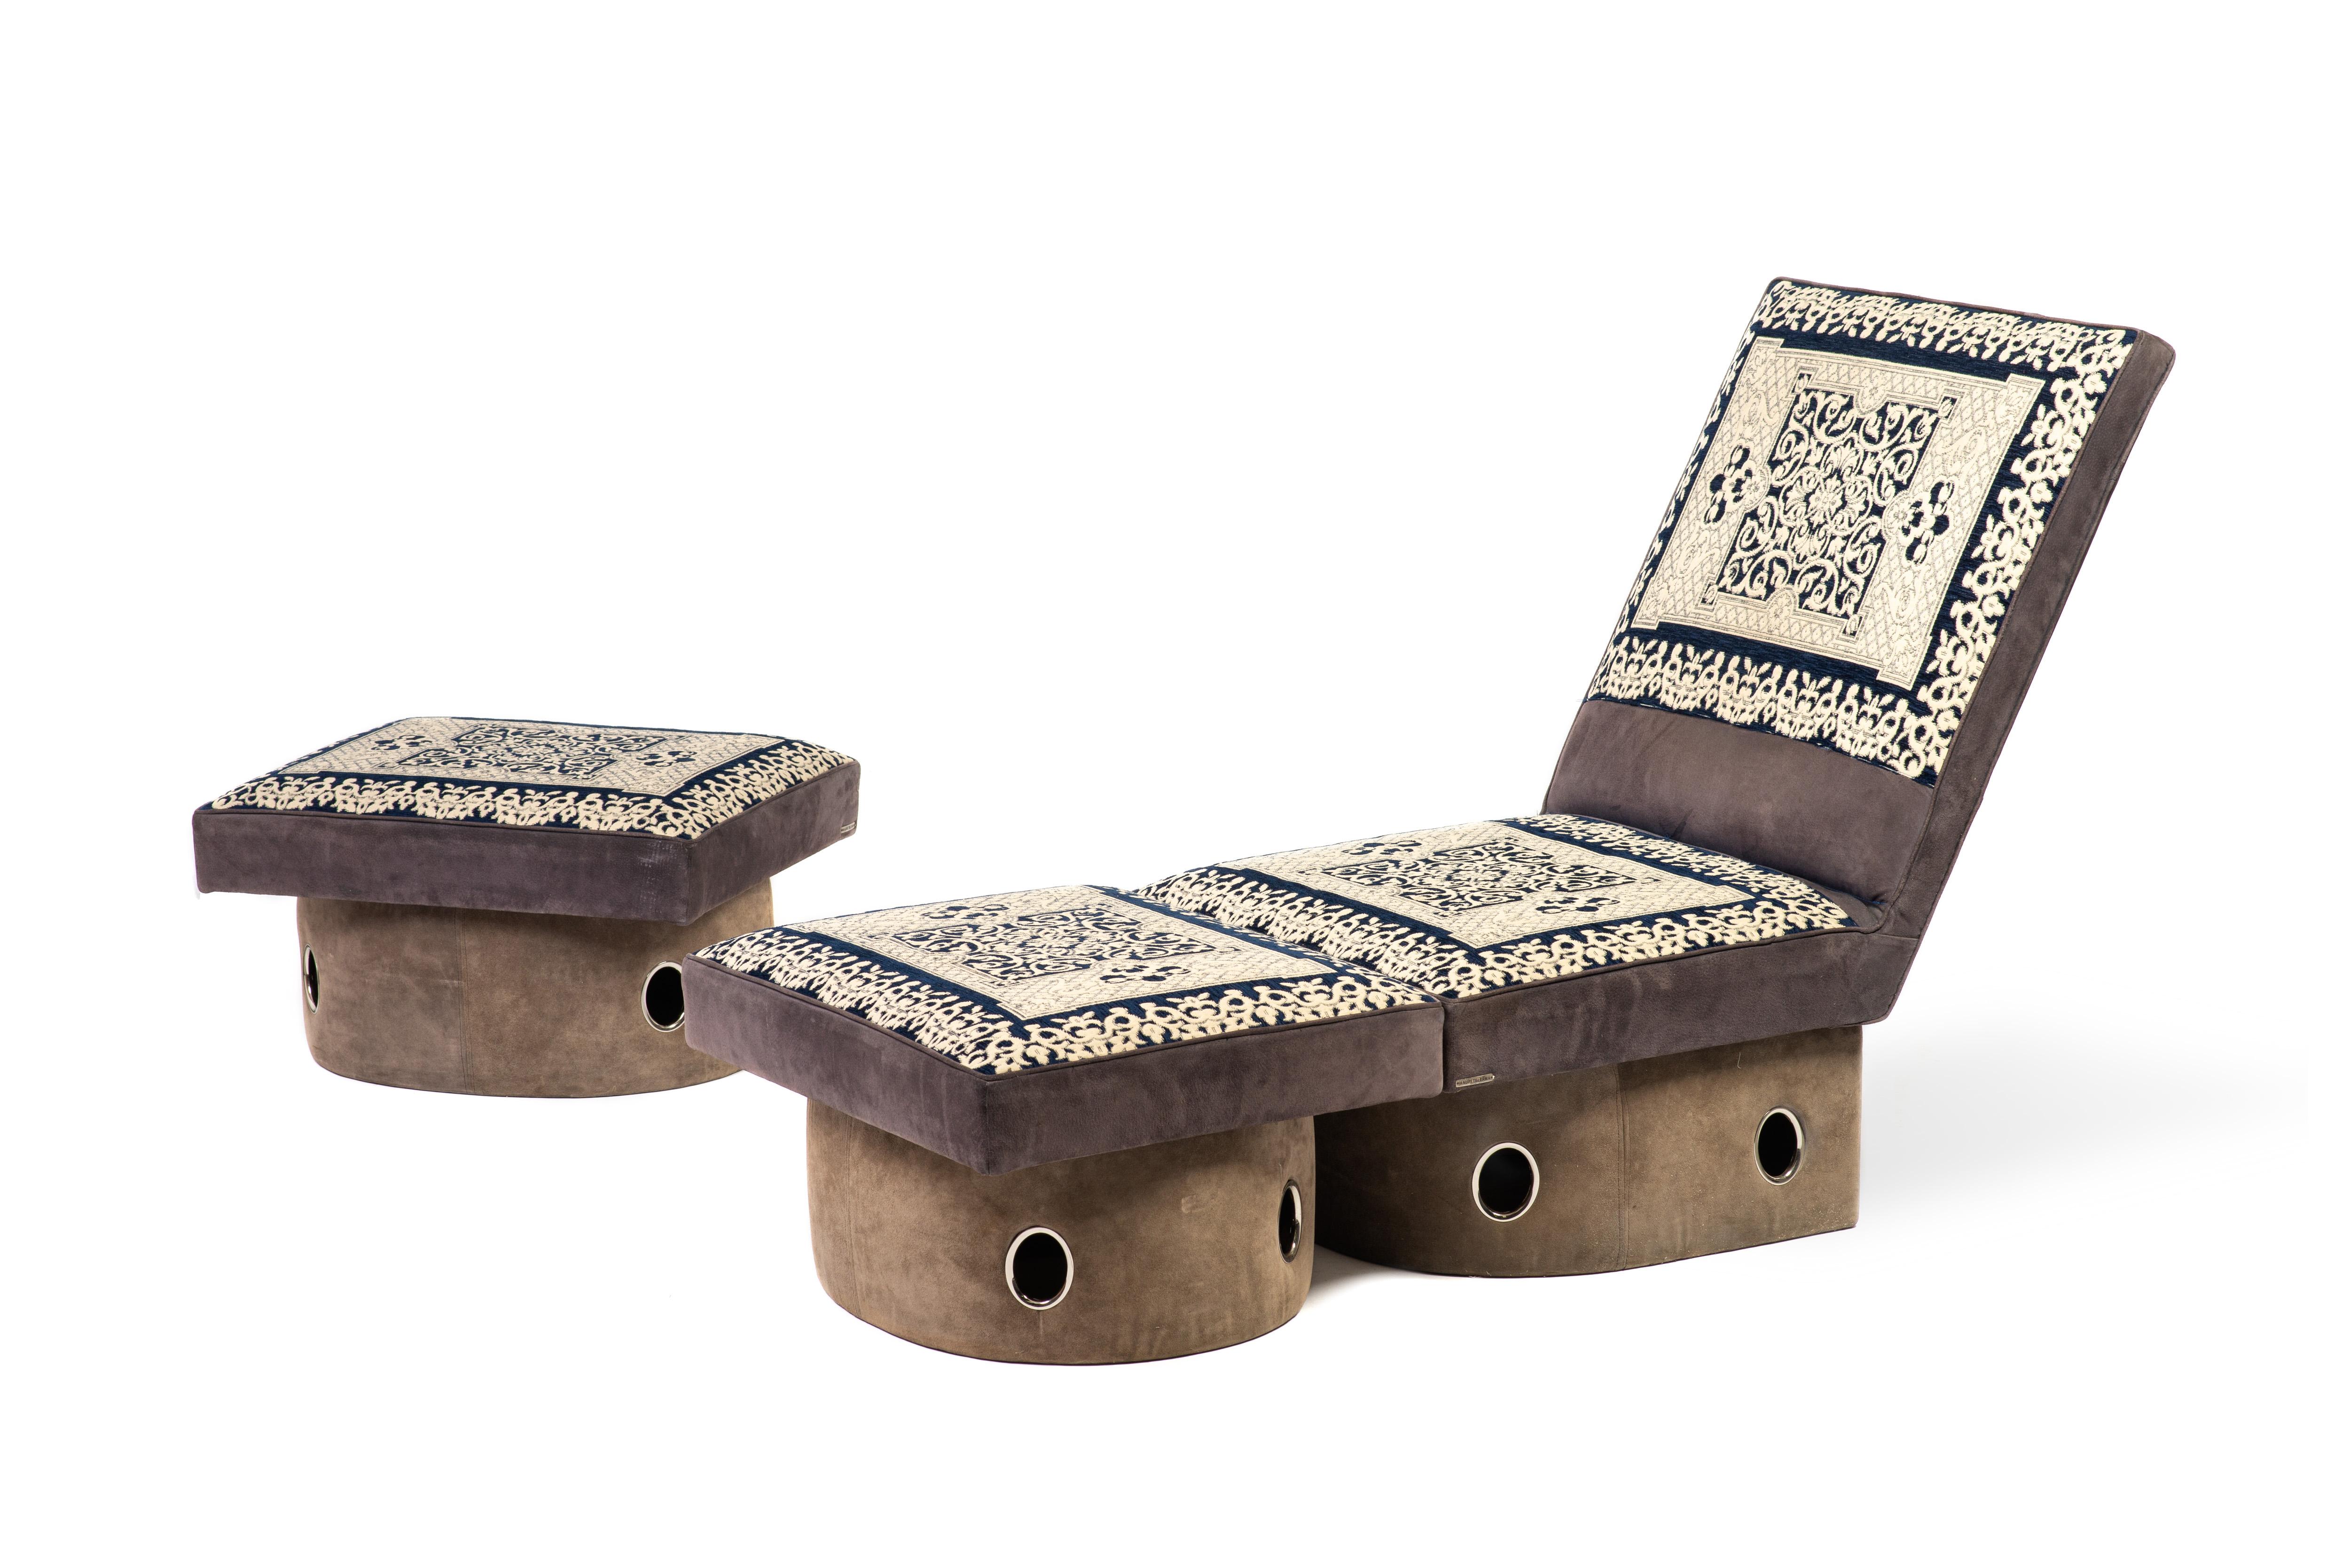 1960s chaise longue by Mauri Telerma. Two ottomans separate to create a separate low chair and two footstools.
In the original fabric, these reflect a Moroccan design but originate in Italy. 
The pieces show little sign of wear considering their